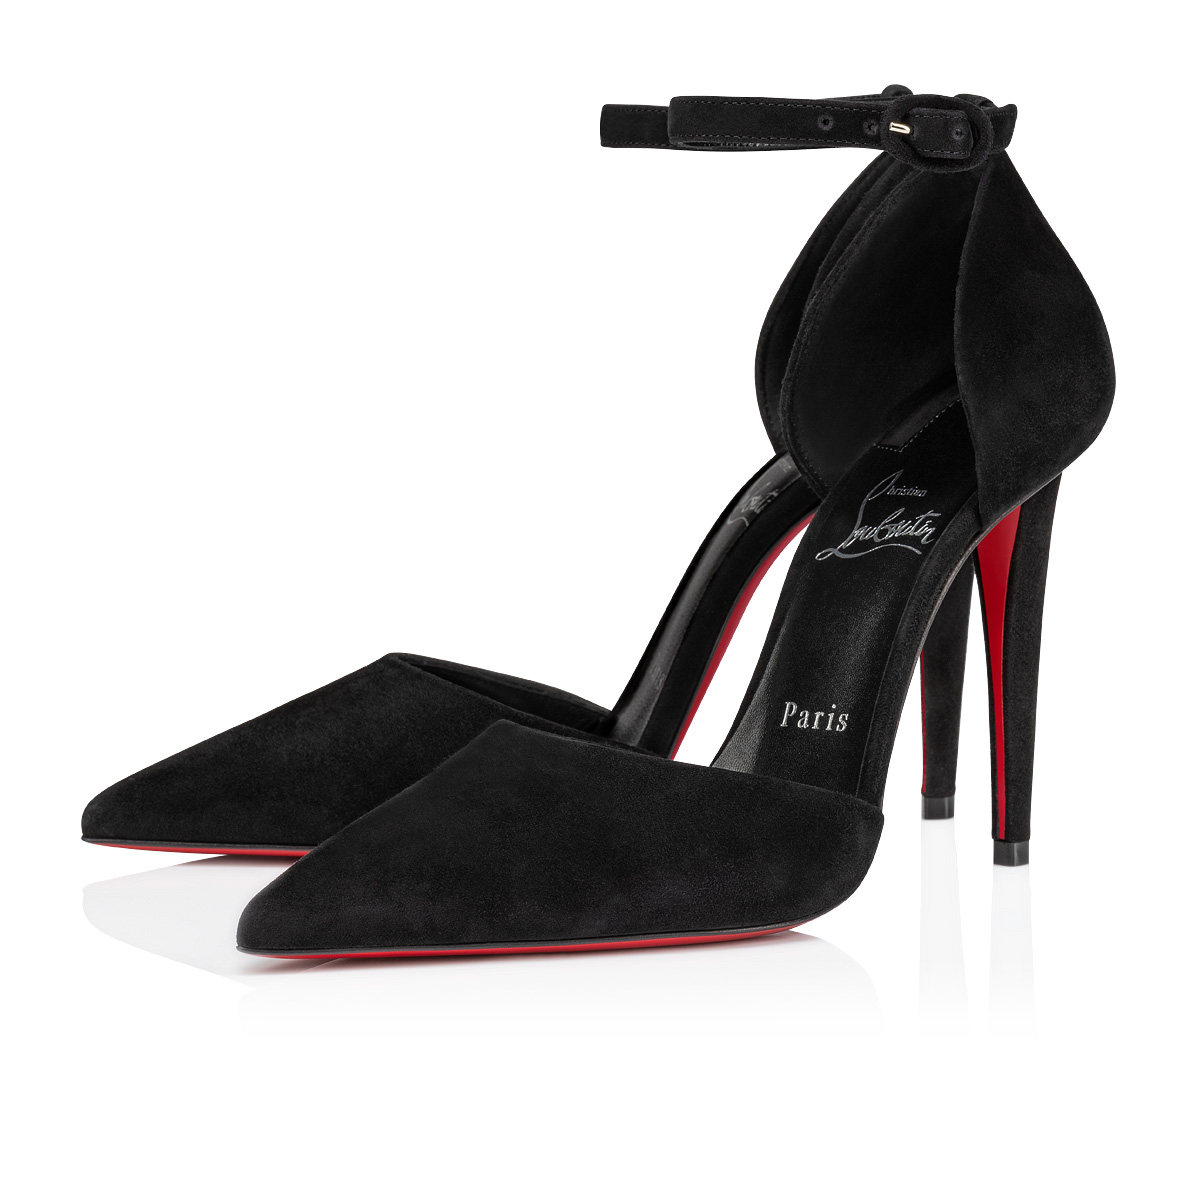 Loubi Queen - 120 mm Sandals - Nappa leather - Black - Christian Louboutin  United States